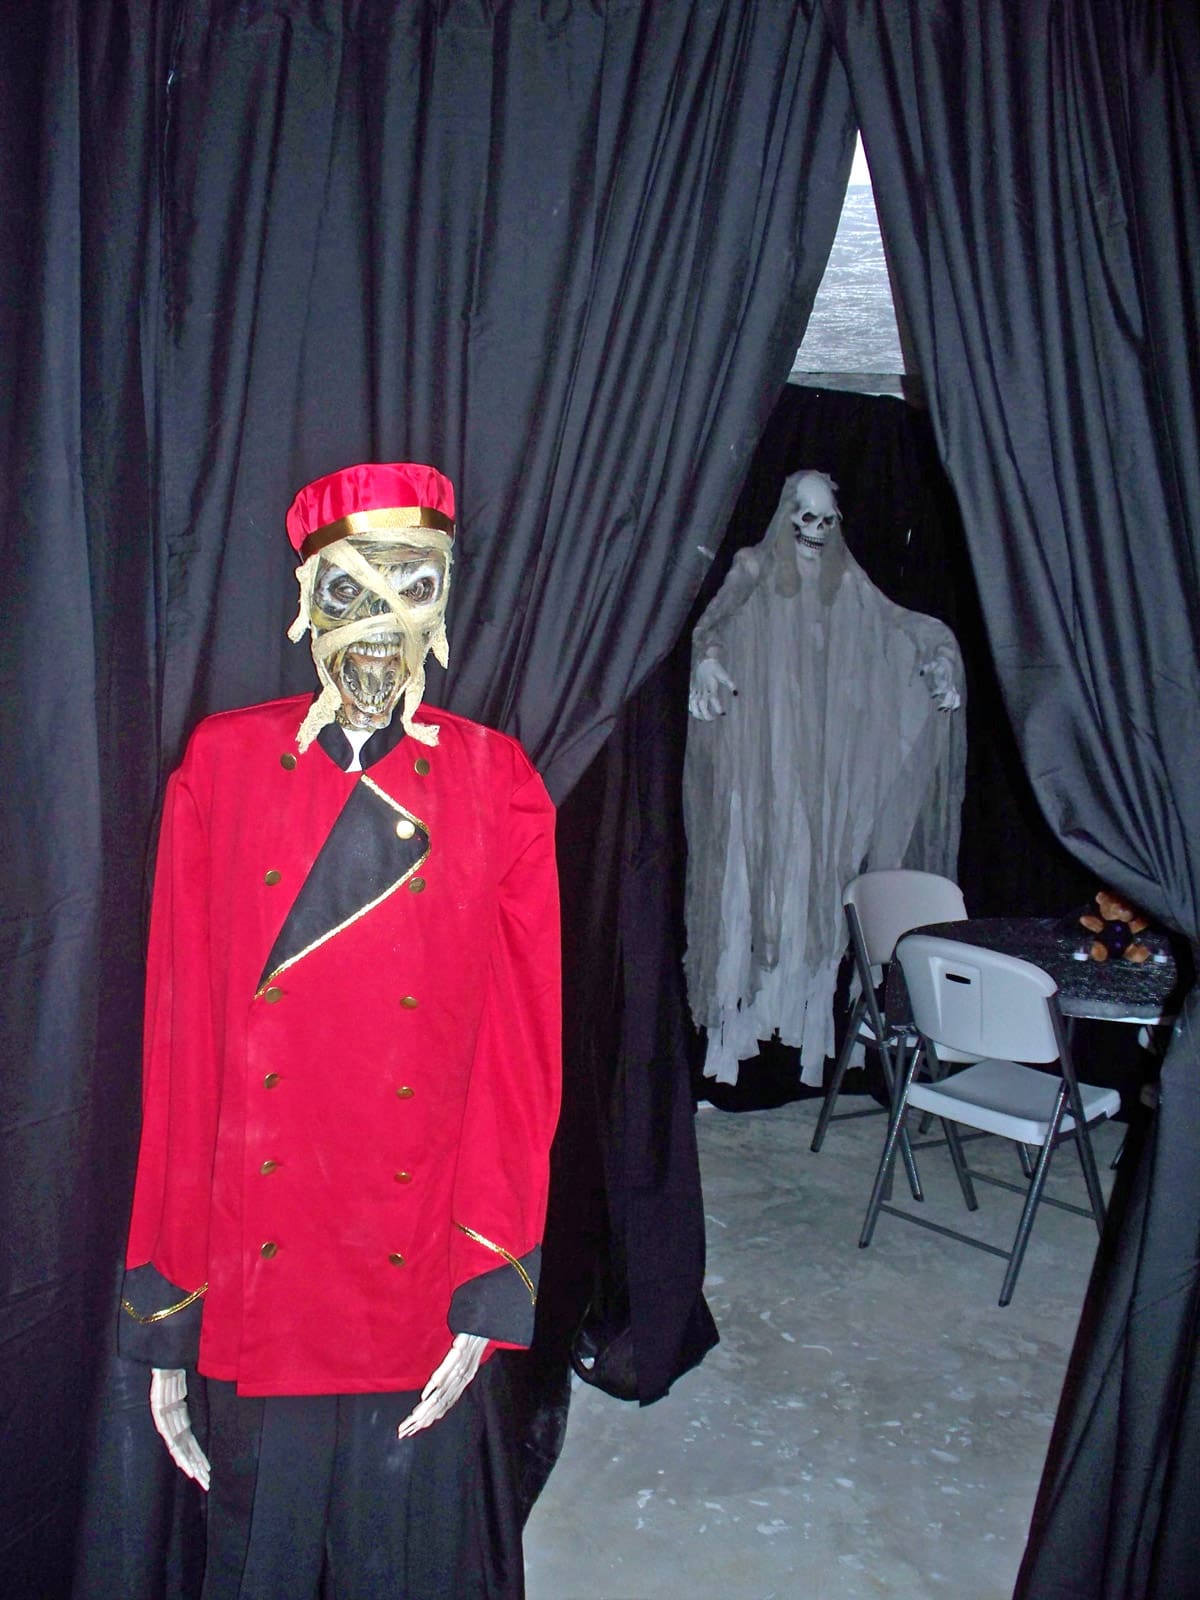 entrance to the Halloween movie theater with a zombie usher.